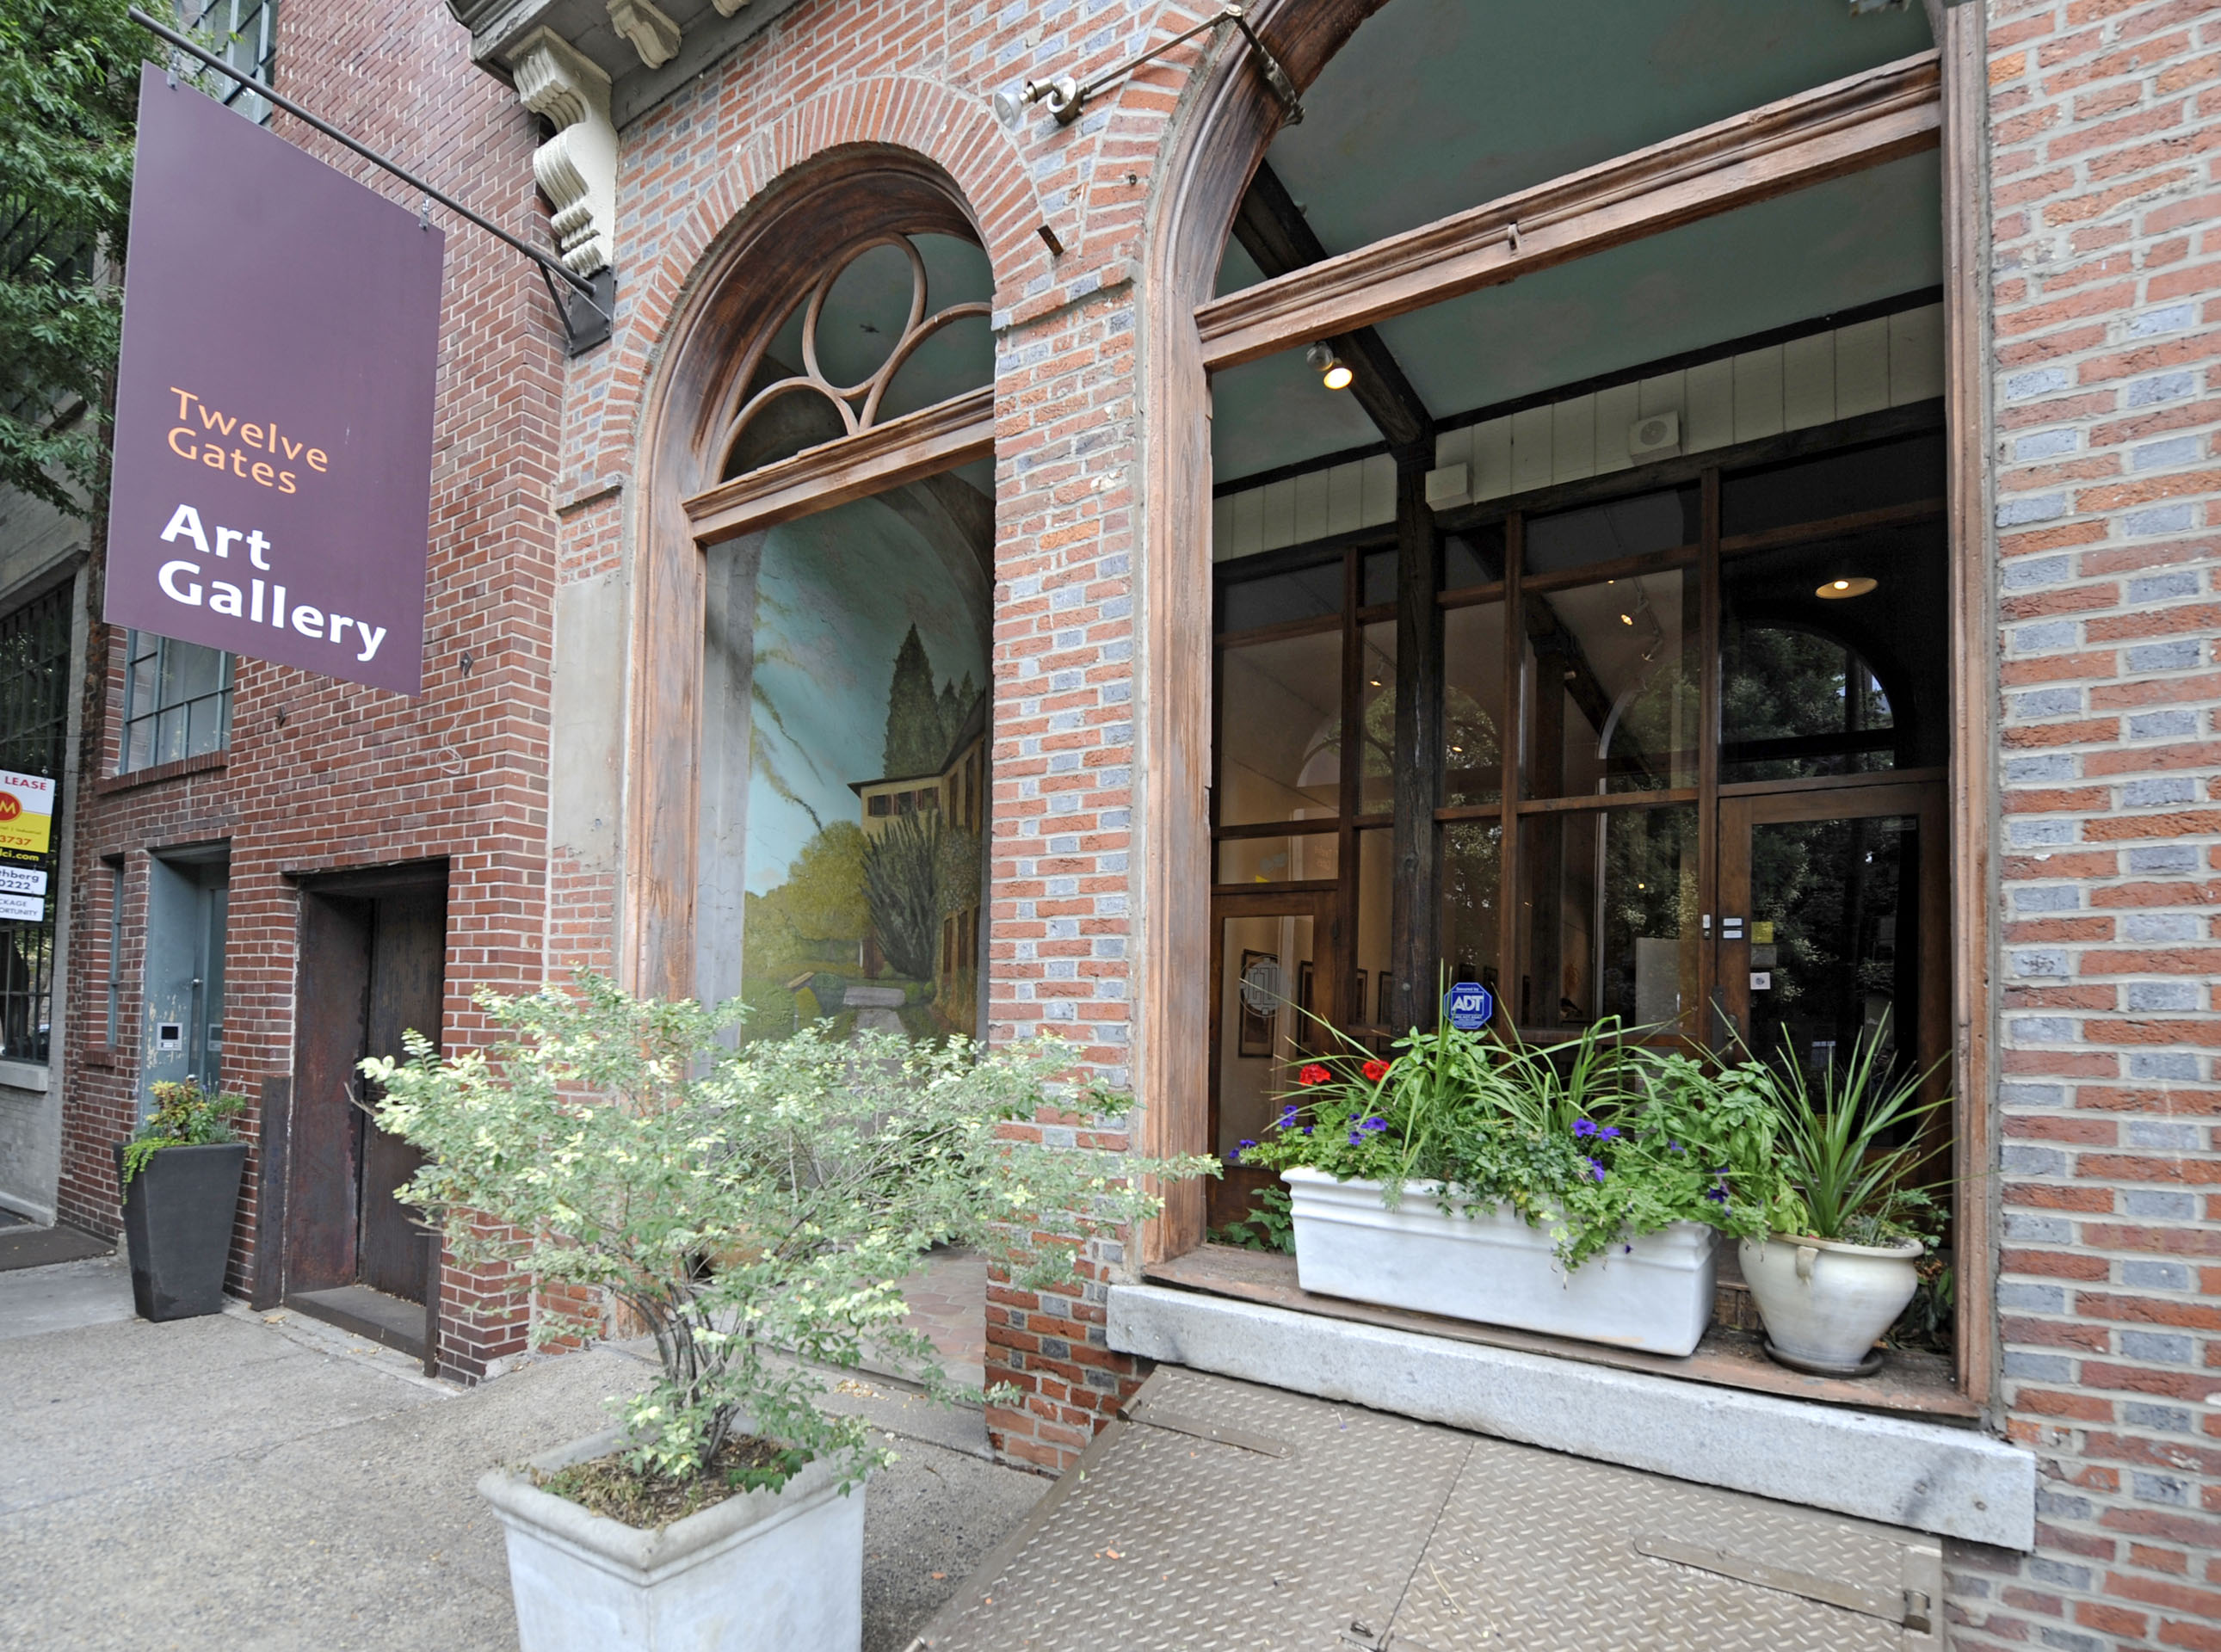 305 Cherry Street, in Old City, is tax delinquent. The art gallery was a tenant, not the owner. (Clem Murray / Inquirer)